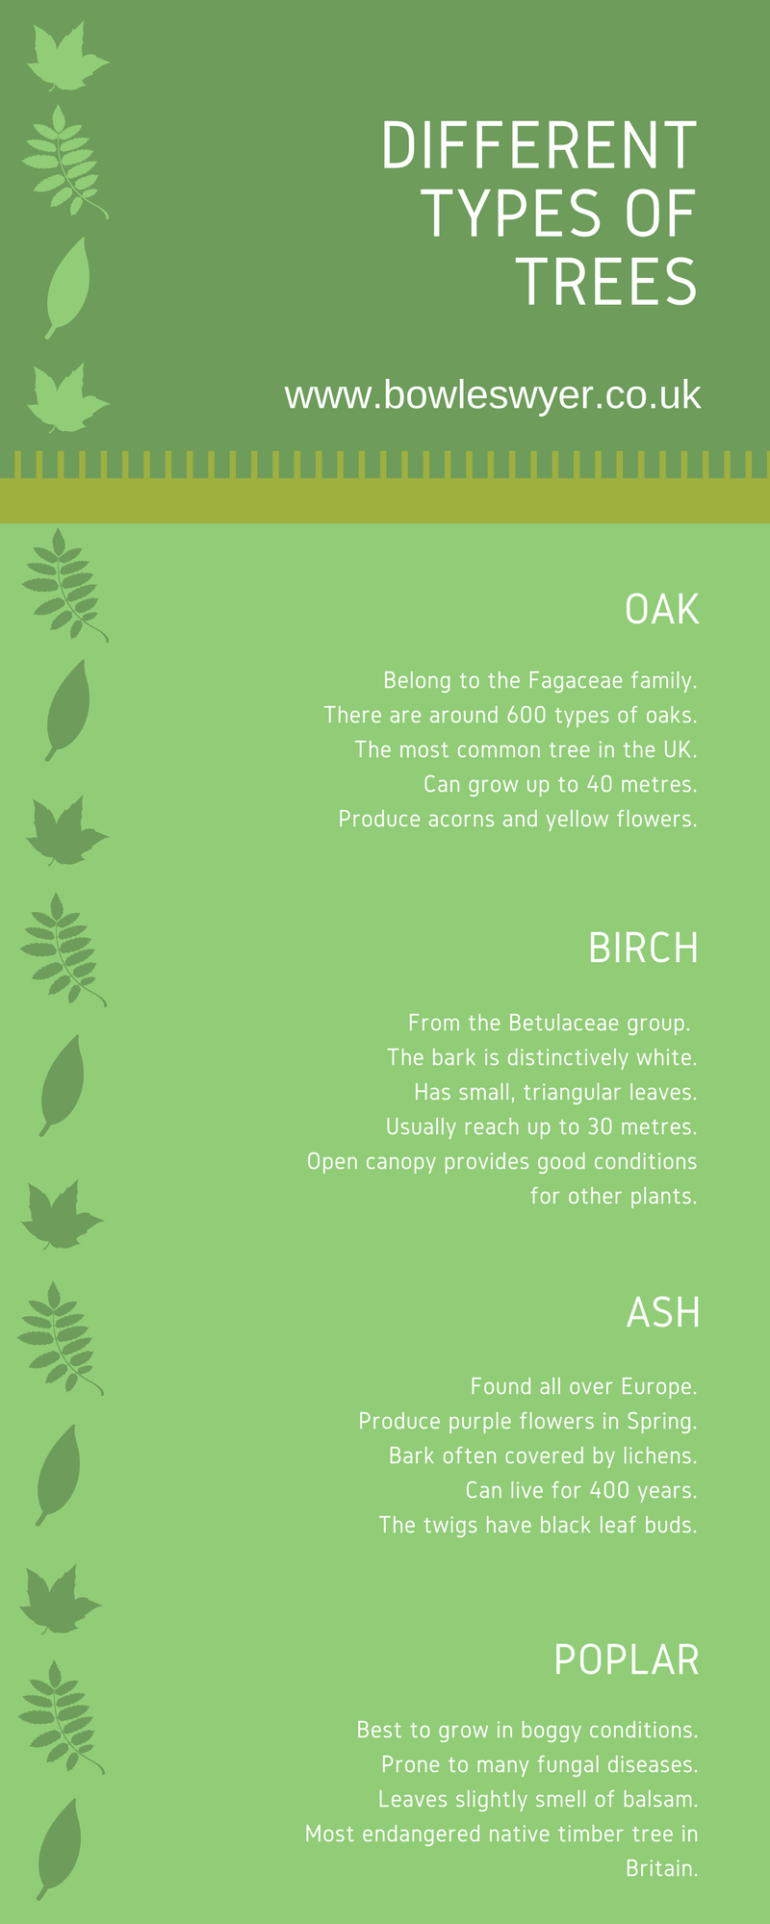 Different Types of Trees in the UK